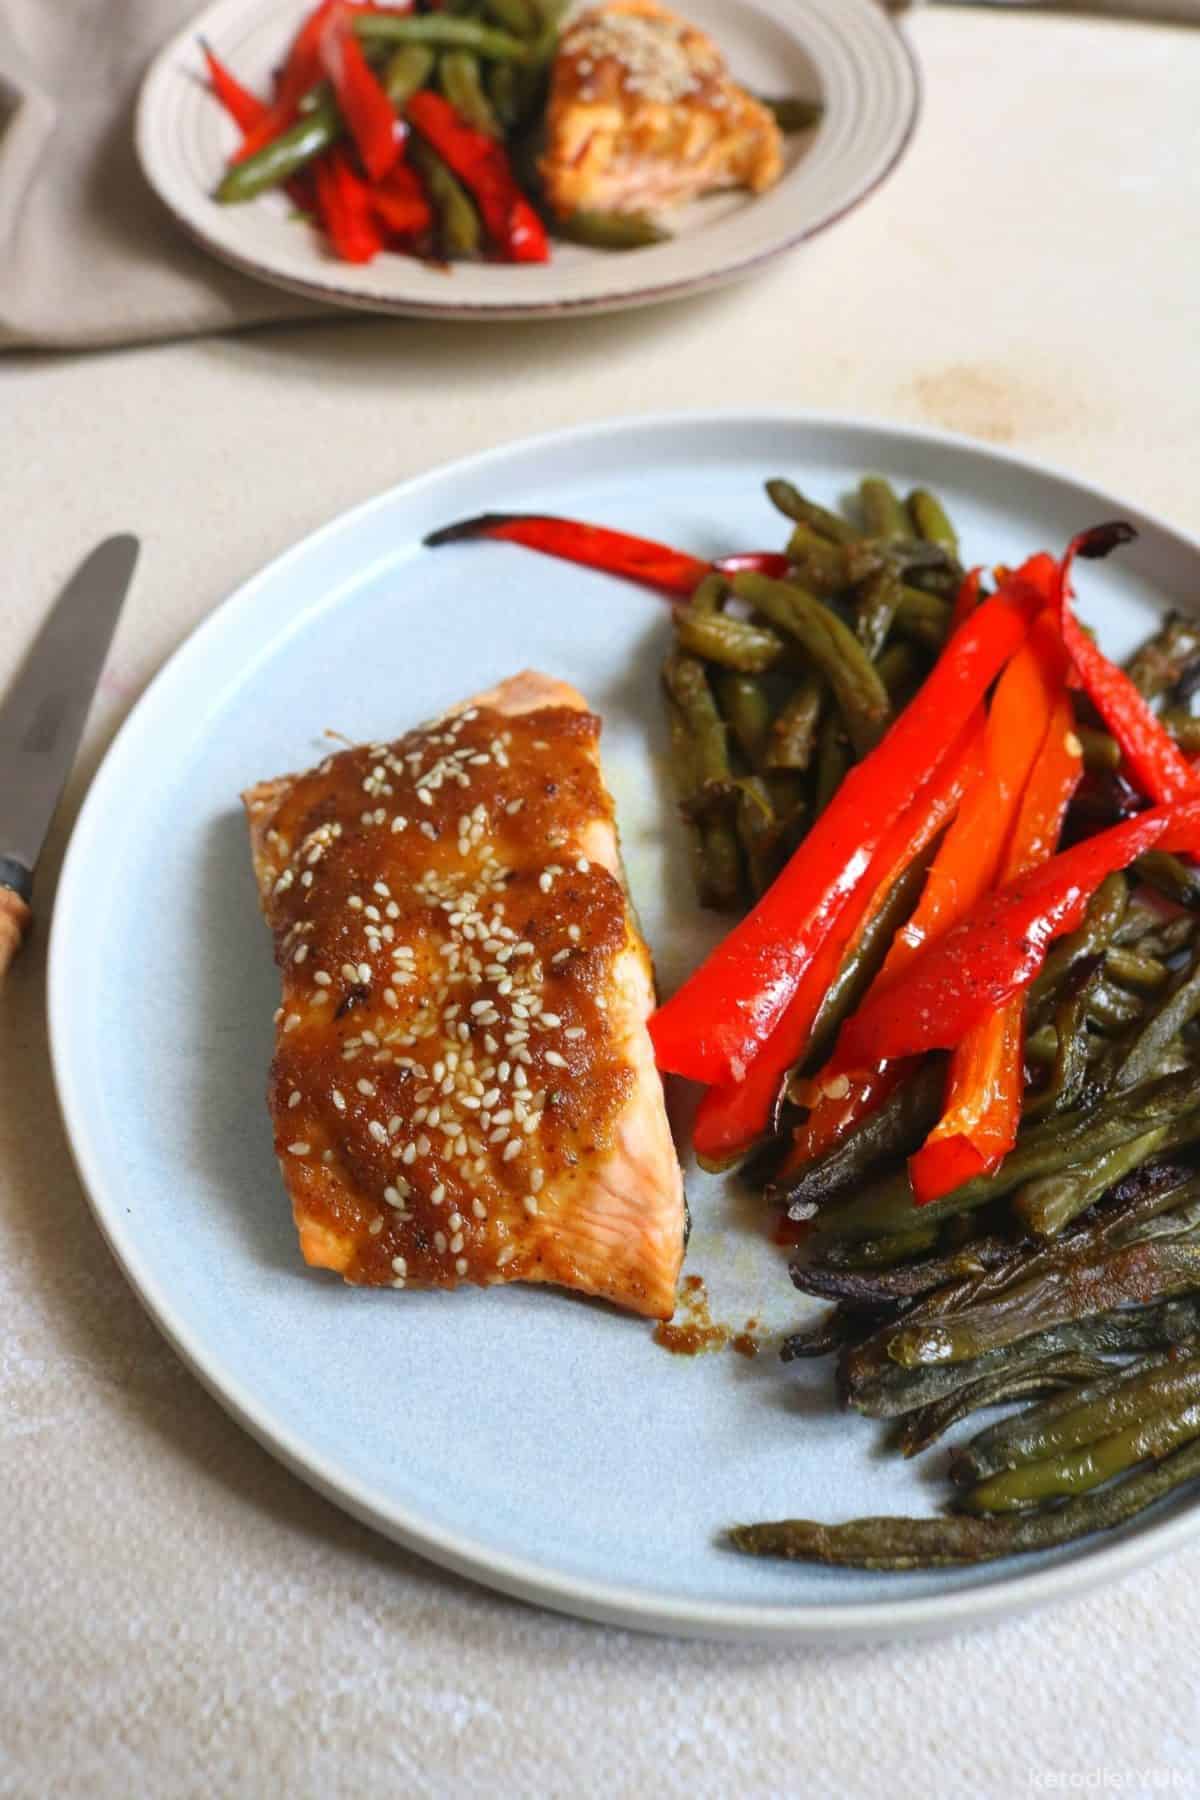 Delicious baked salmon and green beans served on a white plate